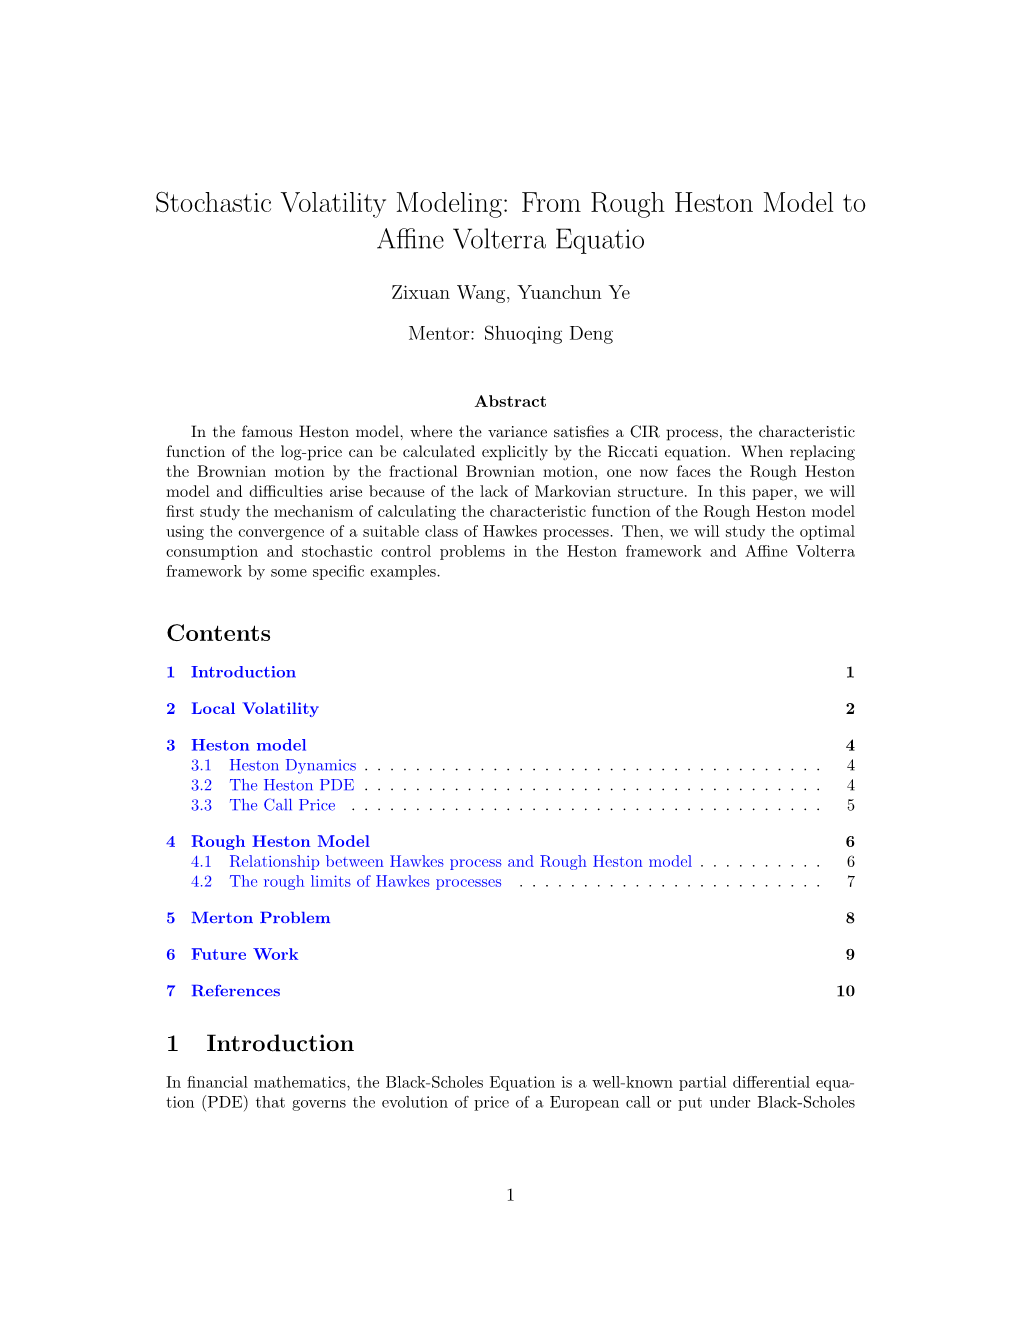 Stochastic Volatility Modeling: from Rough Heston Model to Affine Volterra Equatio